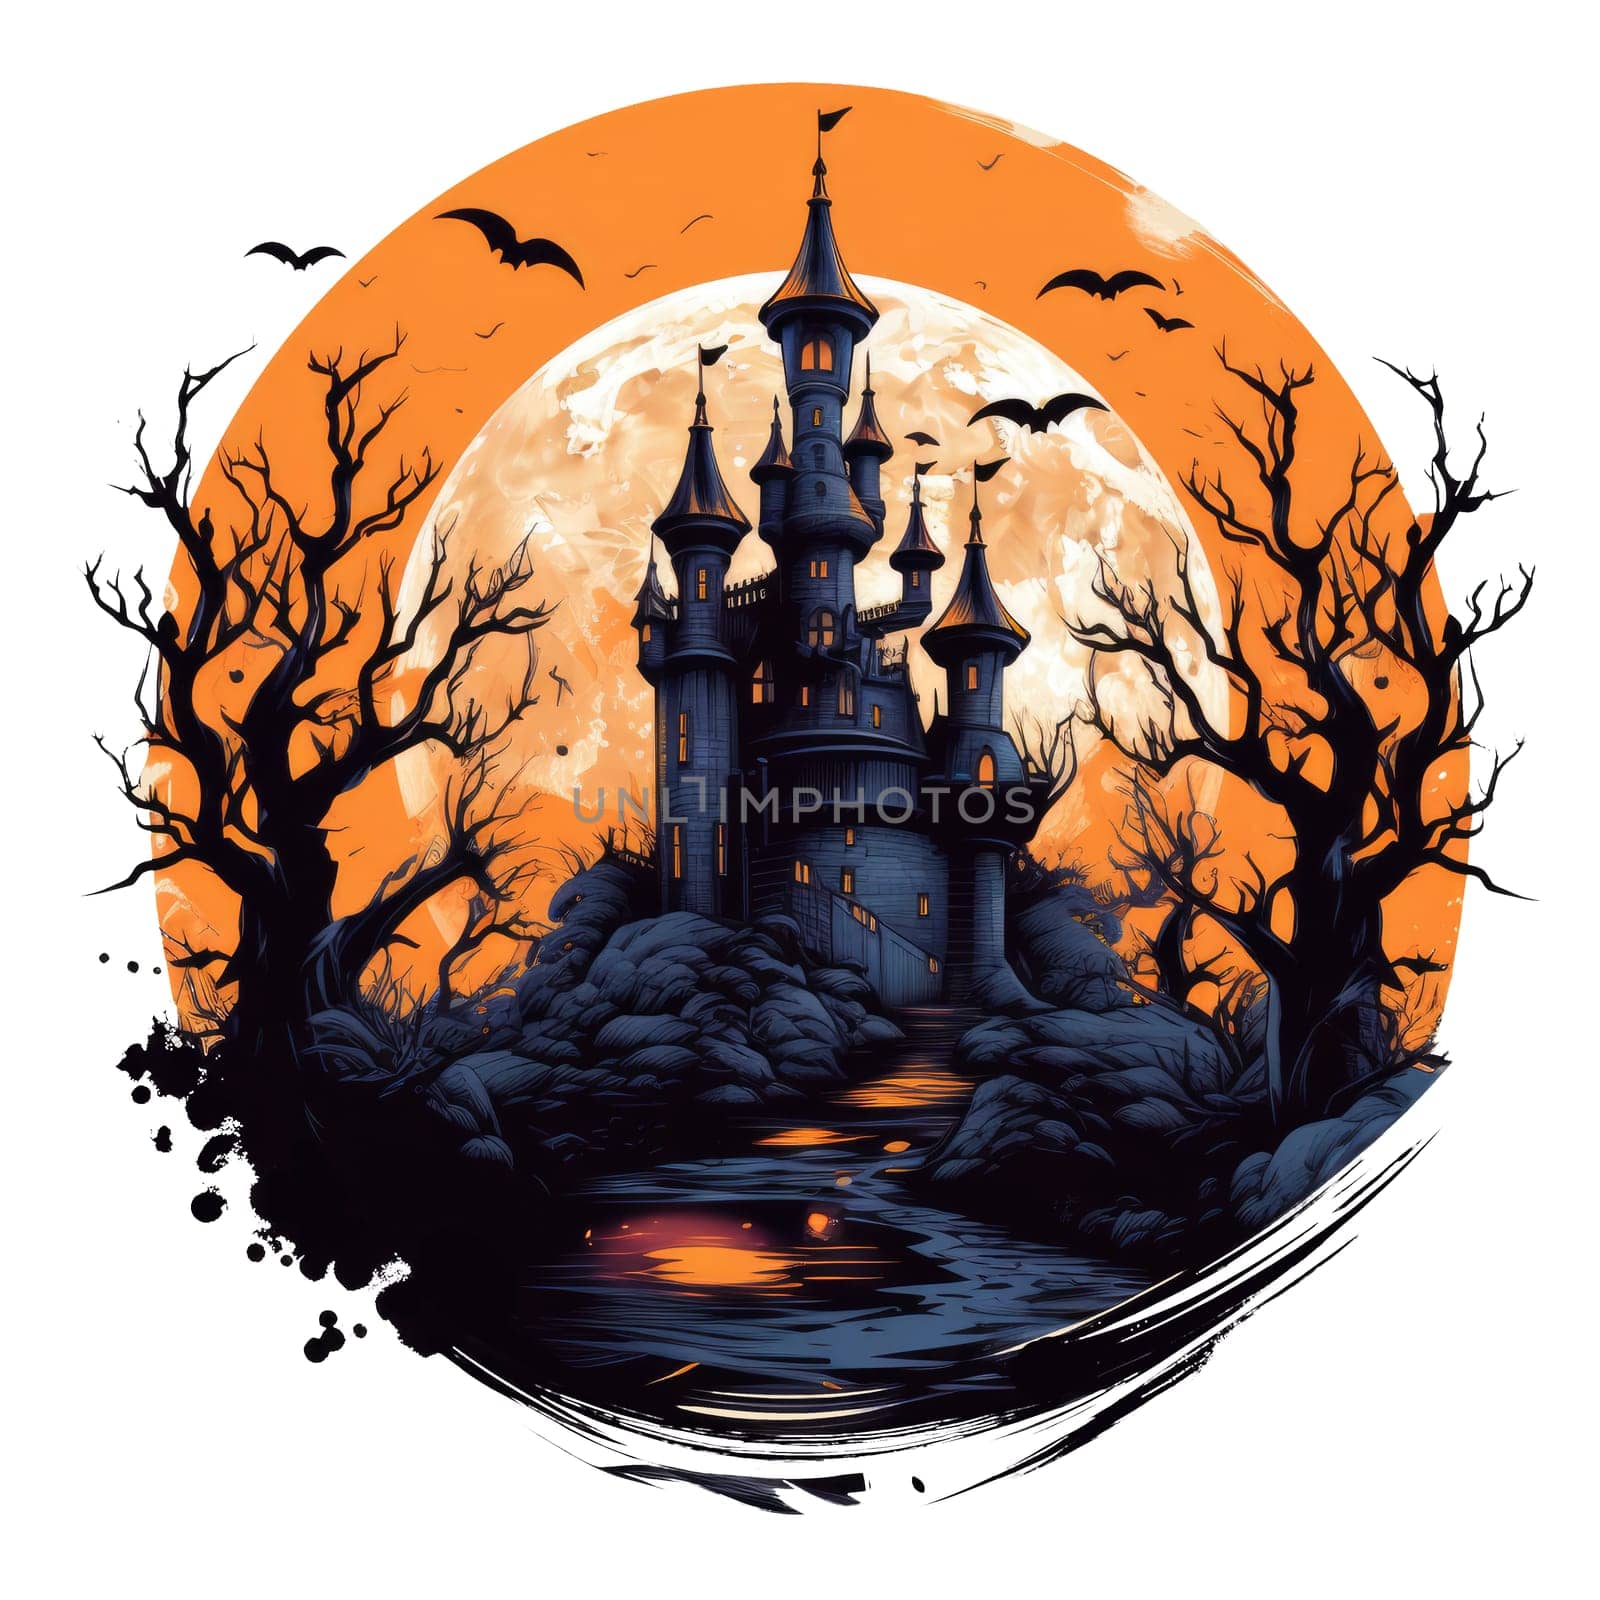 T-shirt or round poster design with castle Halloween theme on white by natali_brill